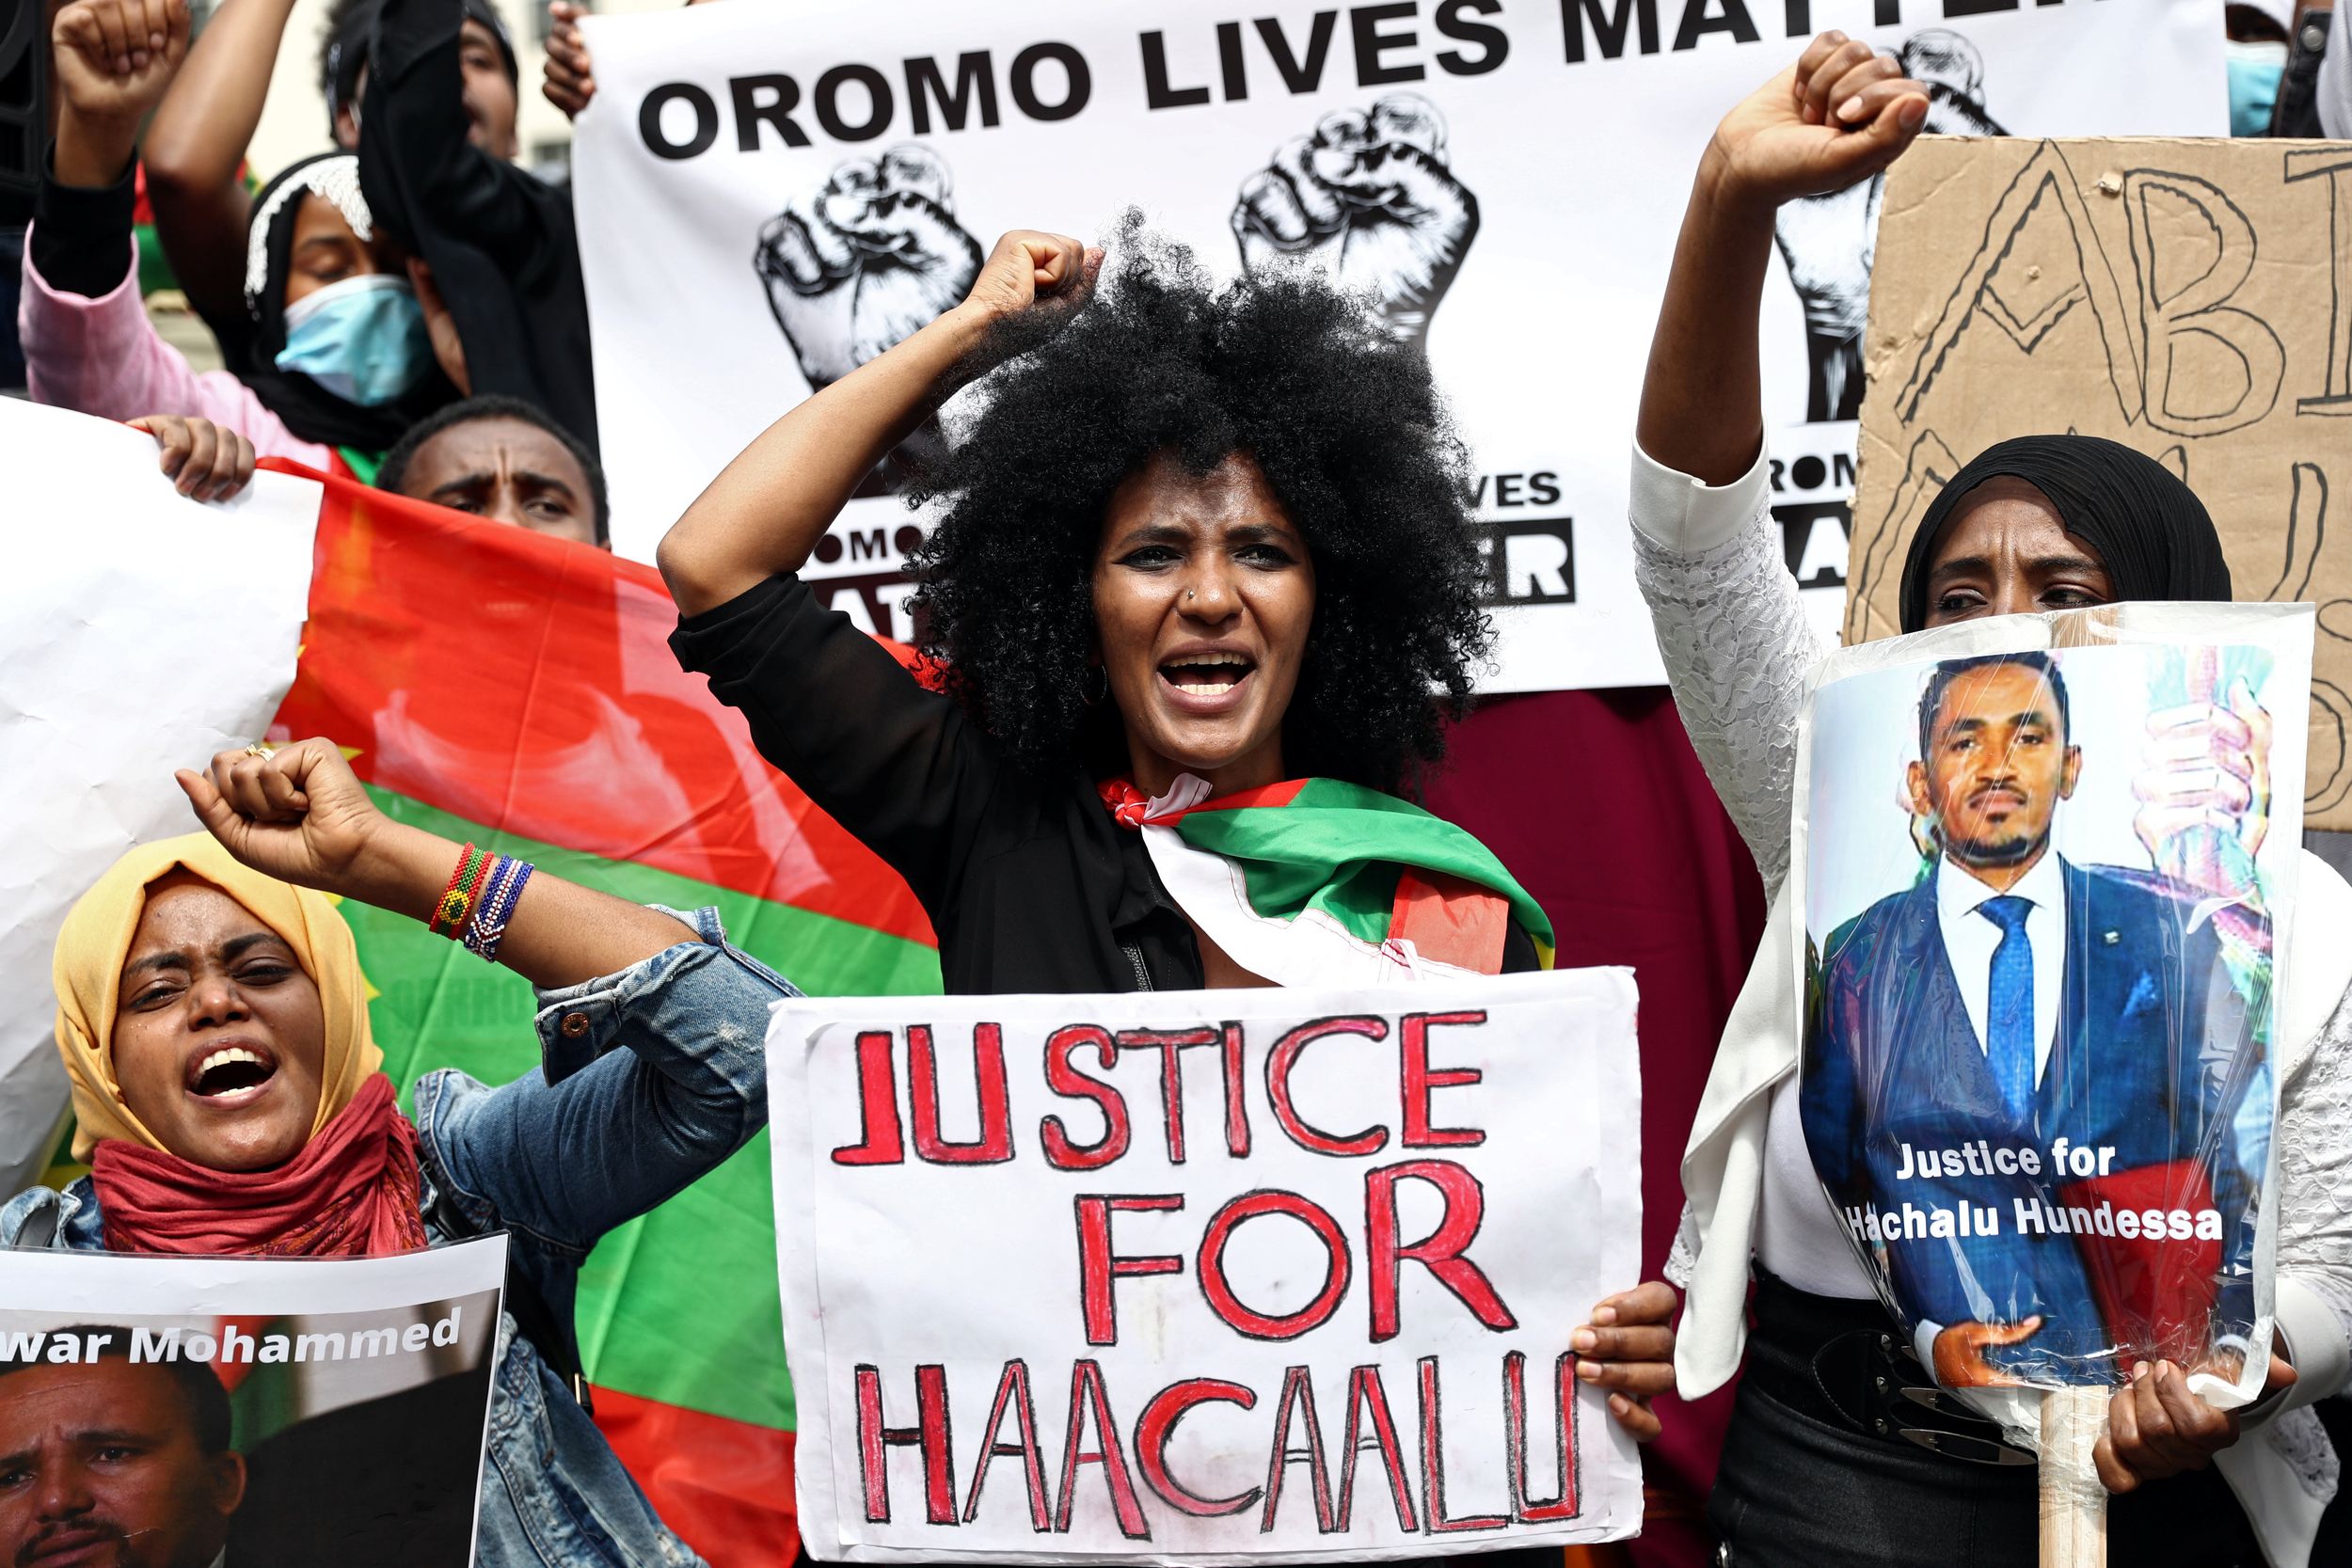 People gather to protest against the treatment of Ethiopia's ethnic Oromo group, July 3, 2020